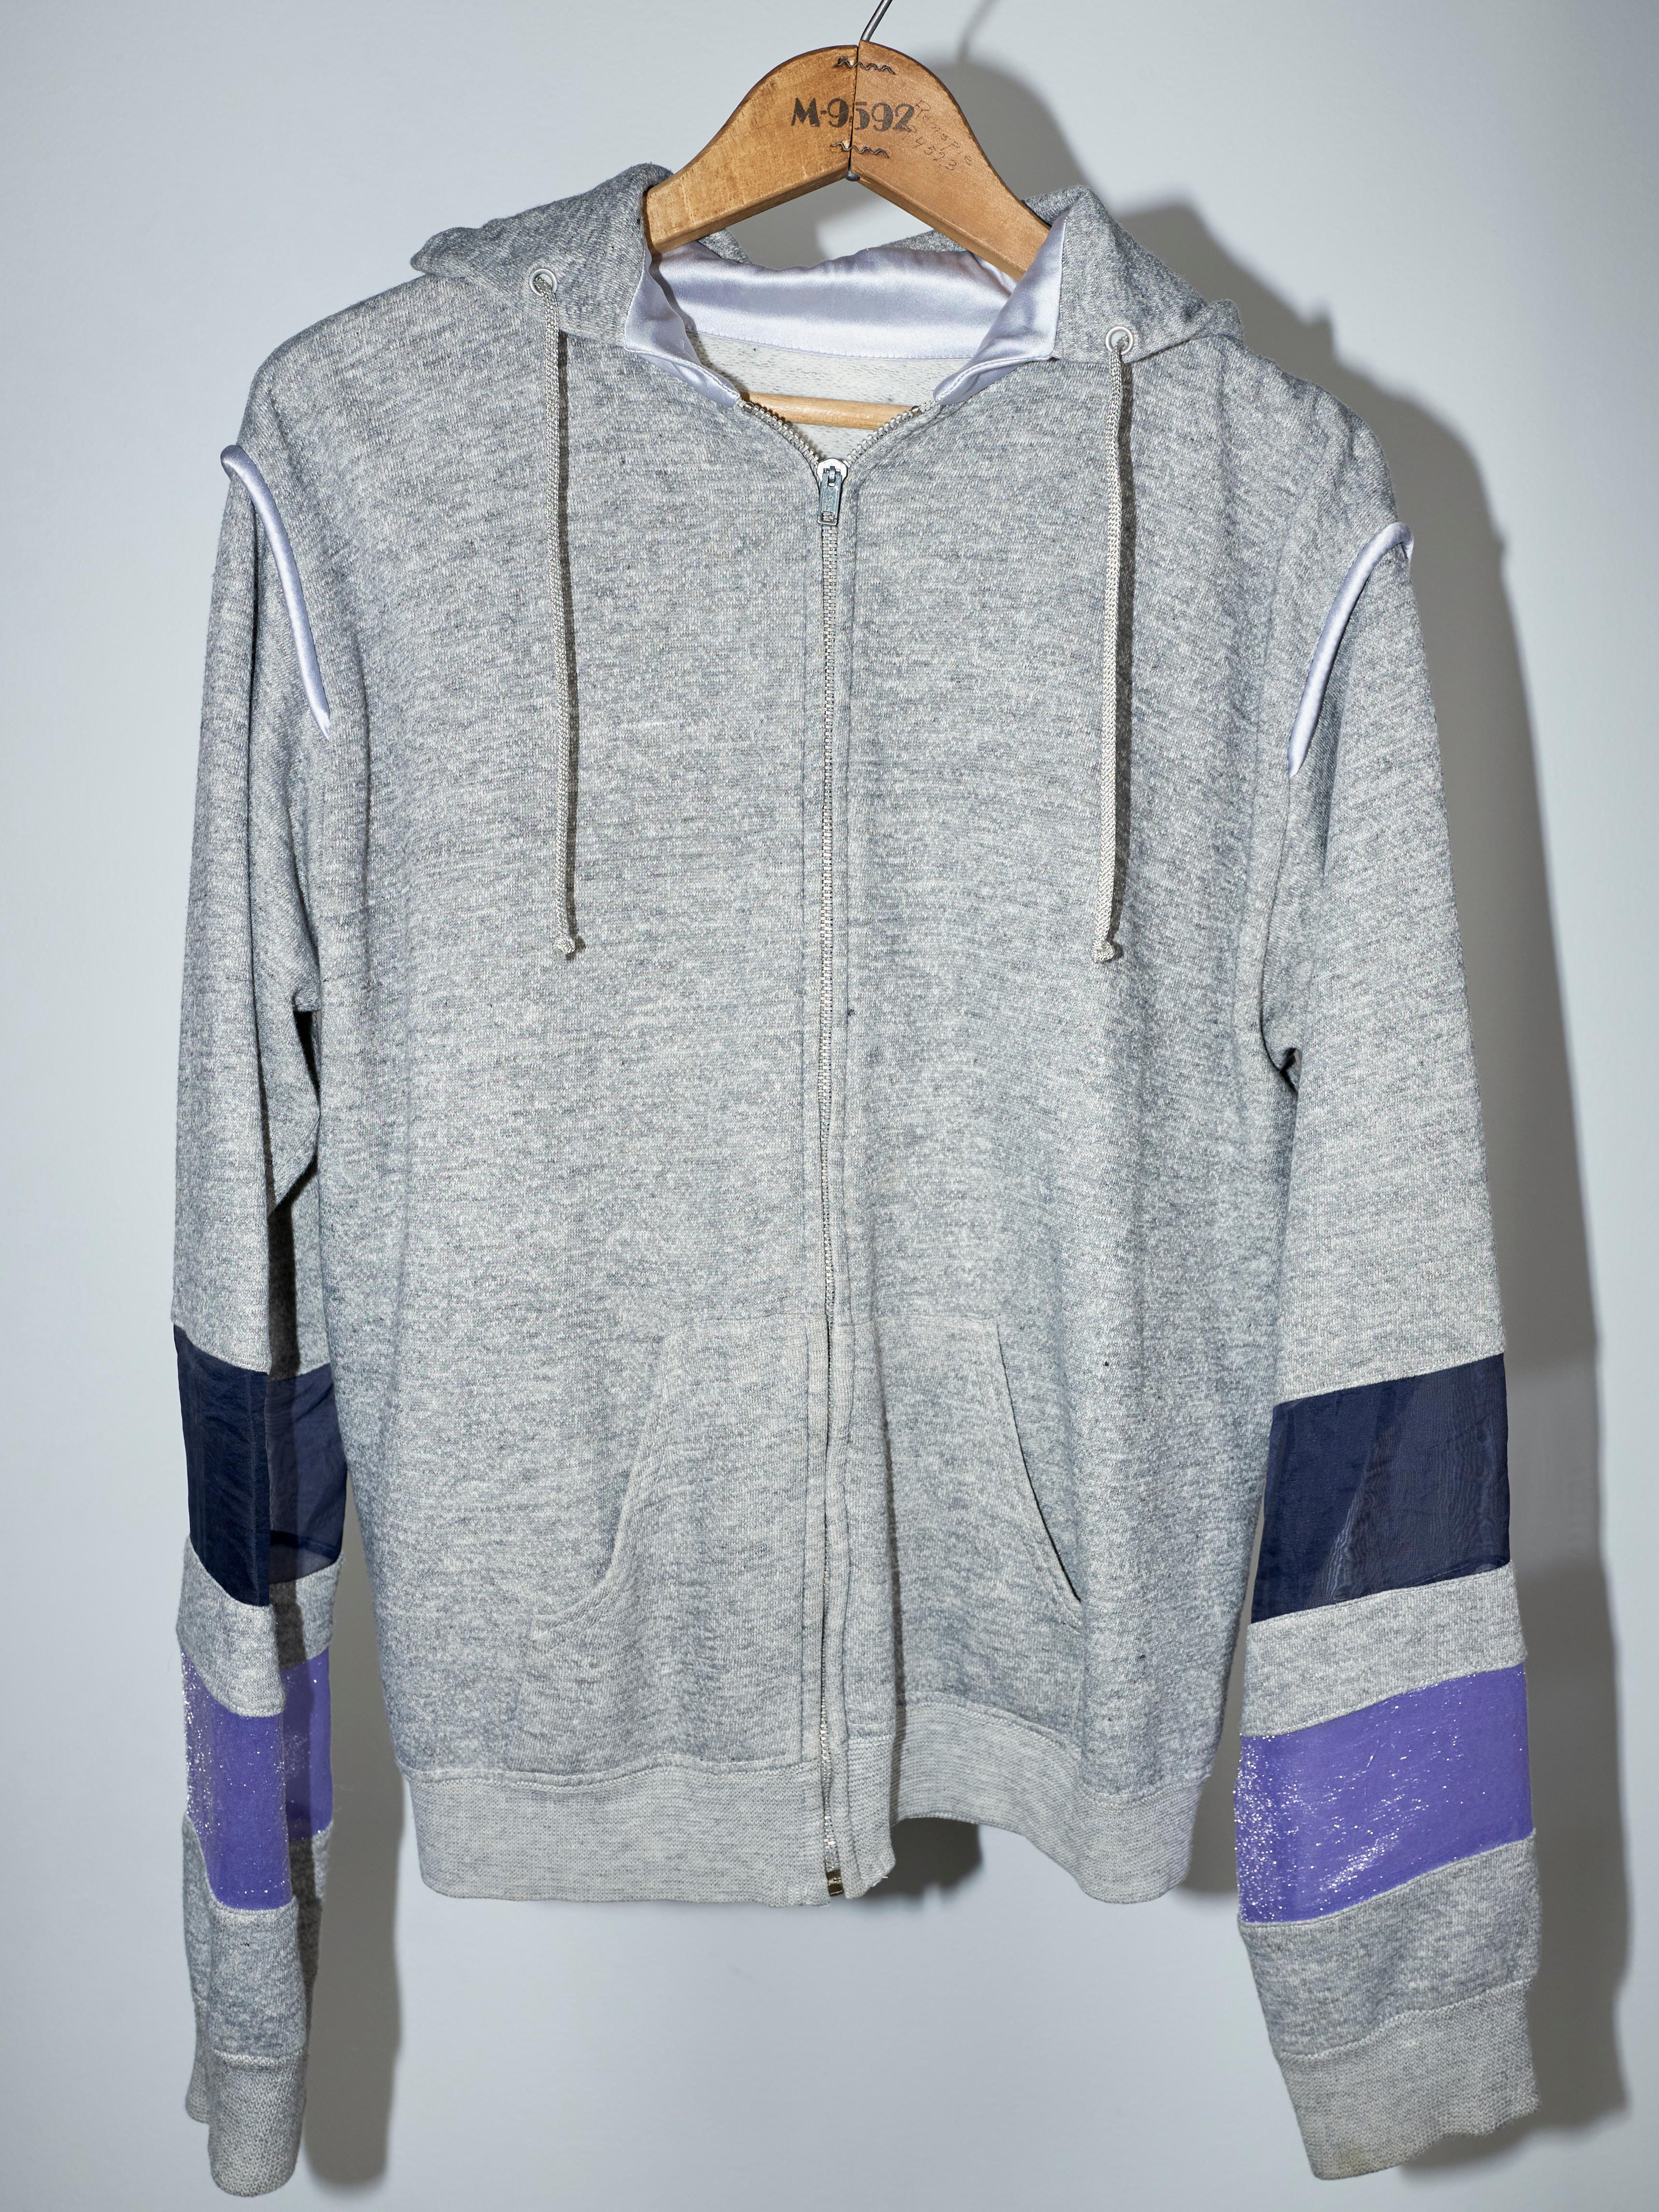 Brand: J Dauphin
One of a kind 
Embellished J Dauphin - Grey Zipper Hoodie Organza Inserts Lilac Blue Silk Details
Material: 50/50 Cotton 
Embellished Sleeve with Organza Details
Hoodie from the 60-70's Made in US

J Dauphin was created 2006 by